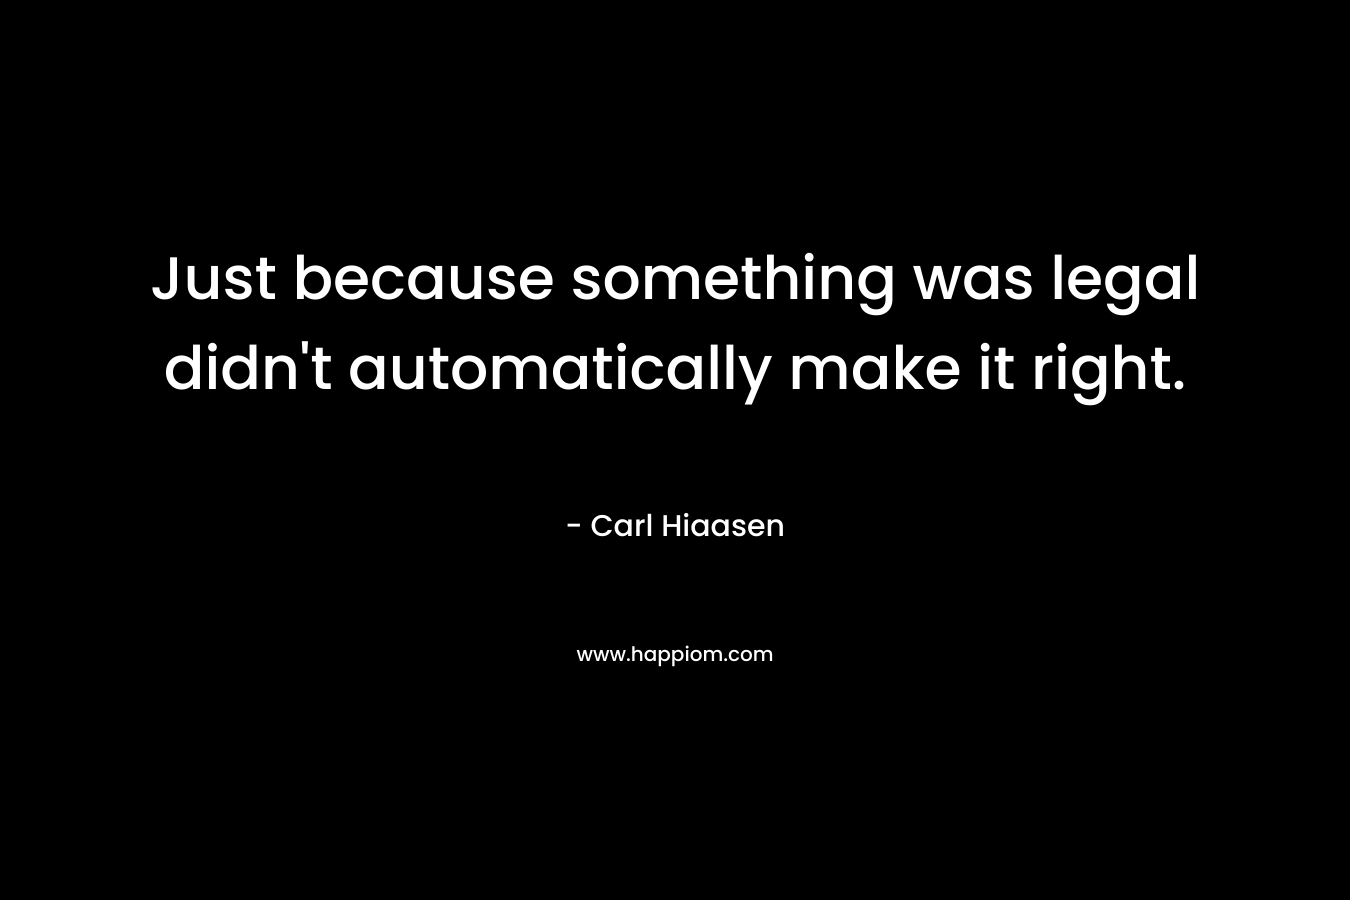 Just because something was legal didn't automatically make it right.